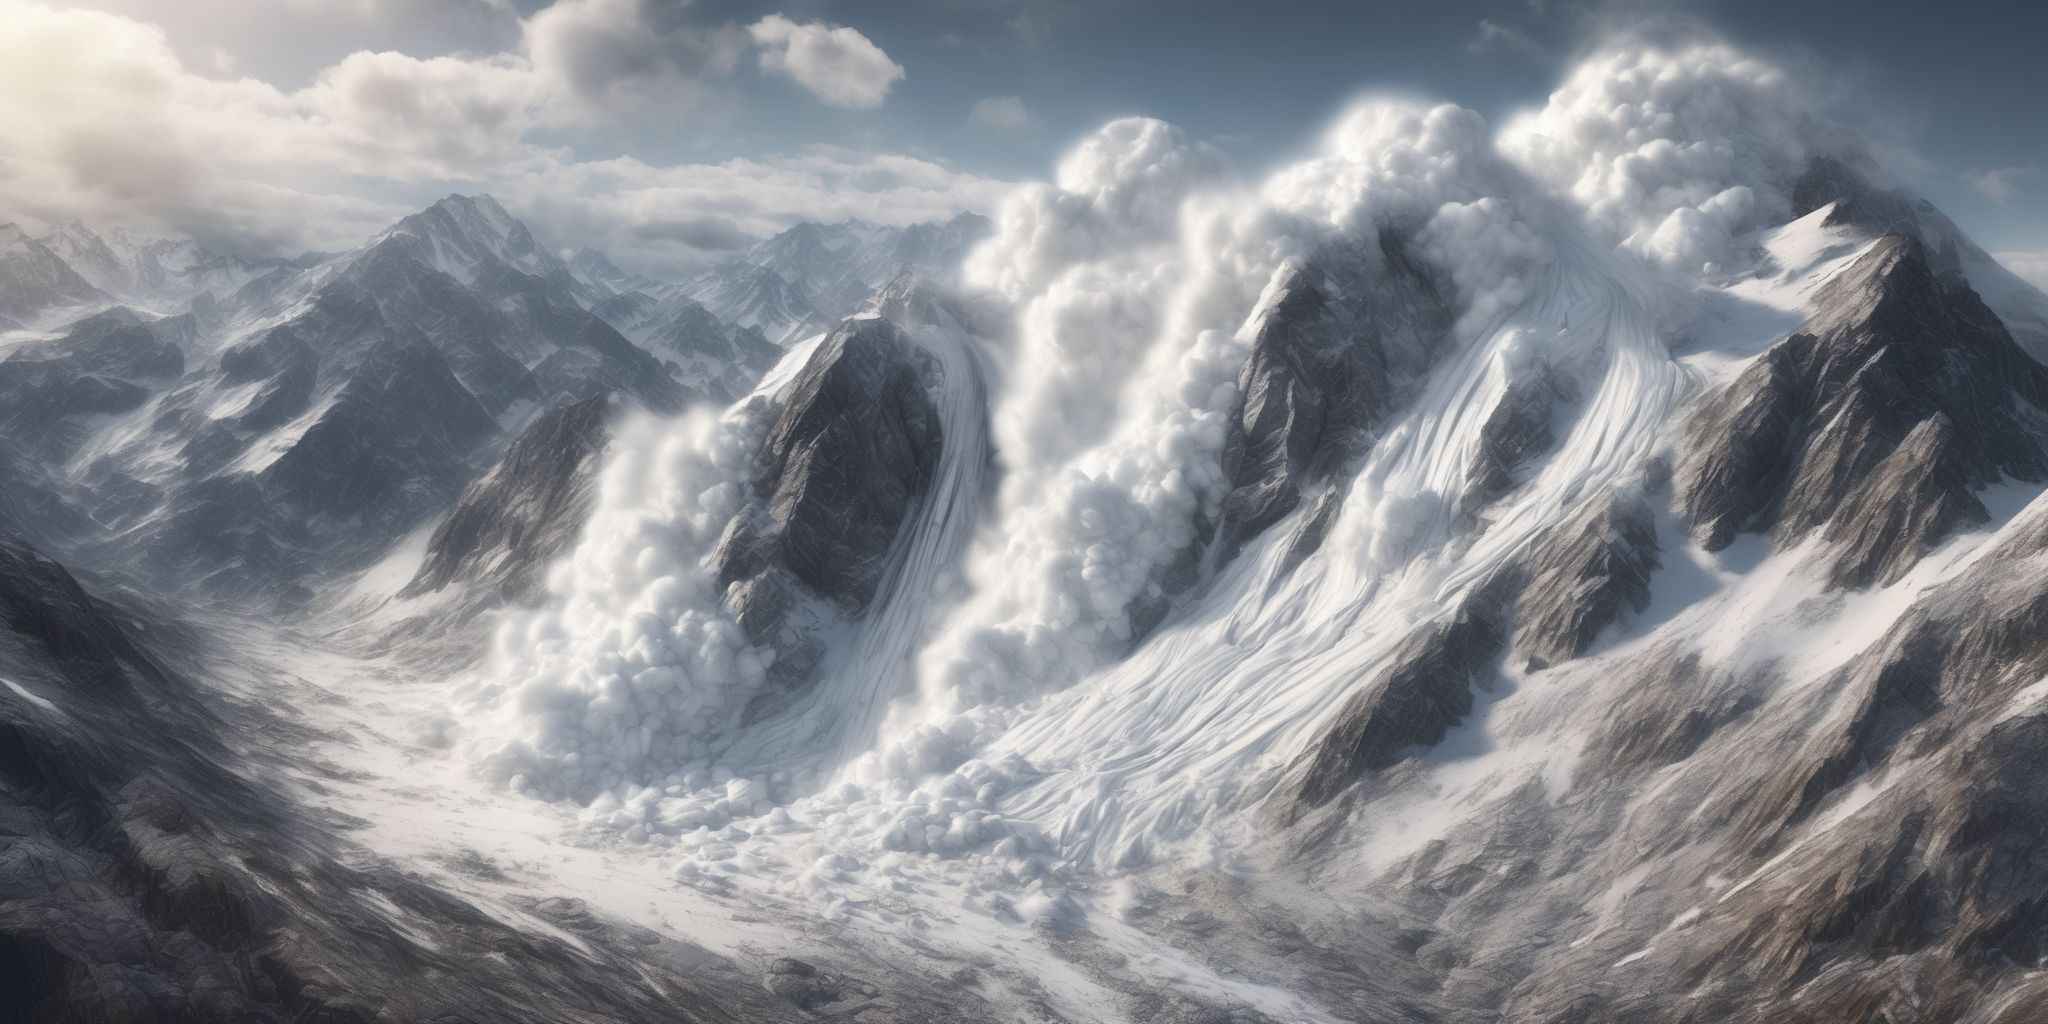 Avalanche  in realistic, photographic style